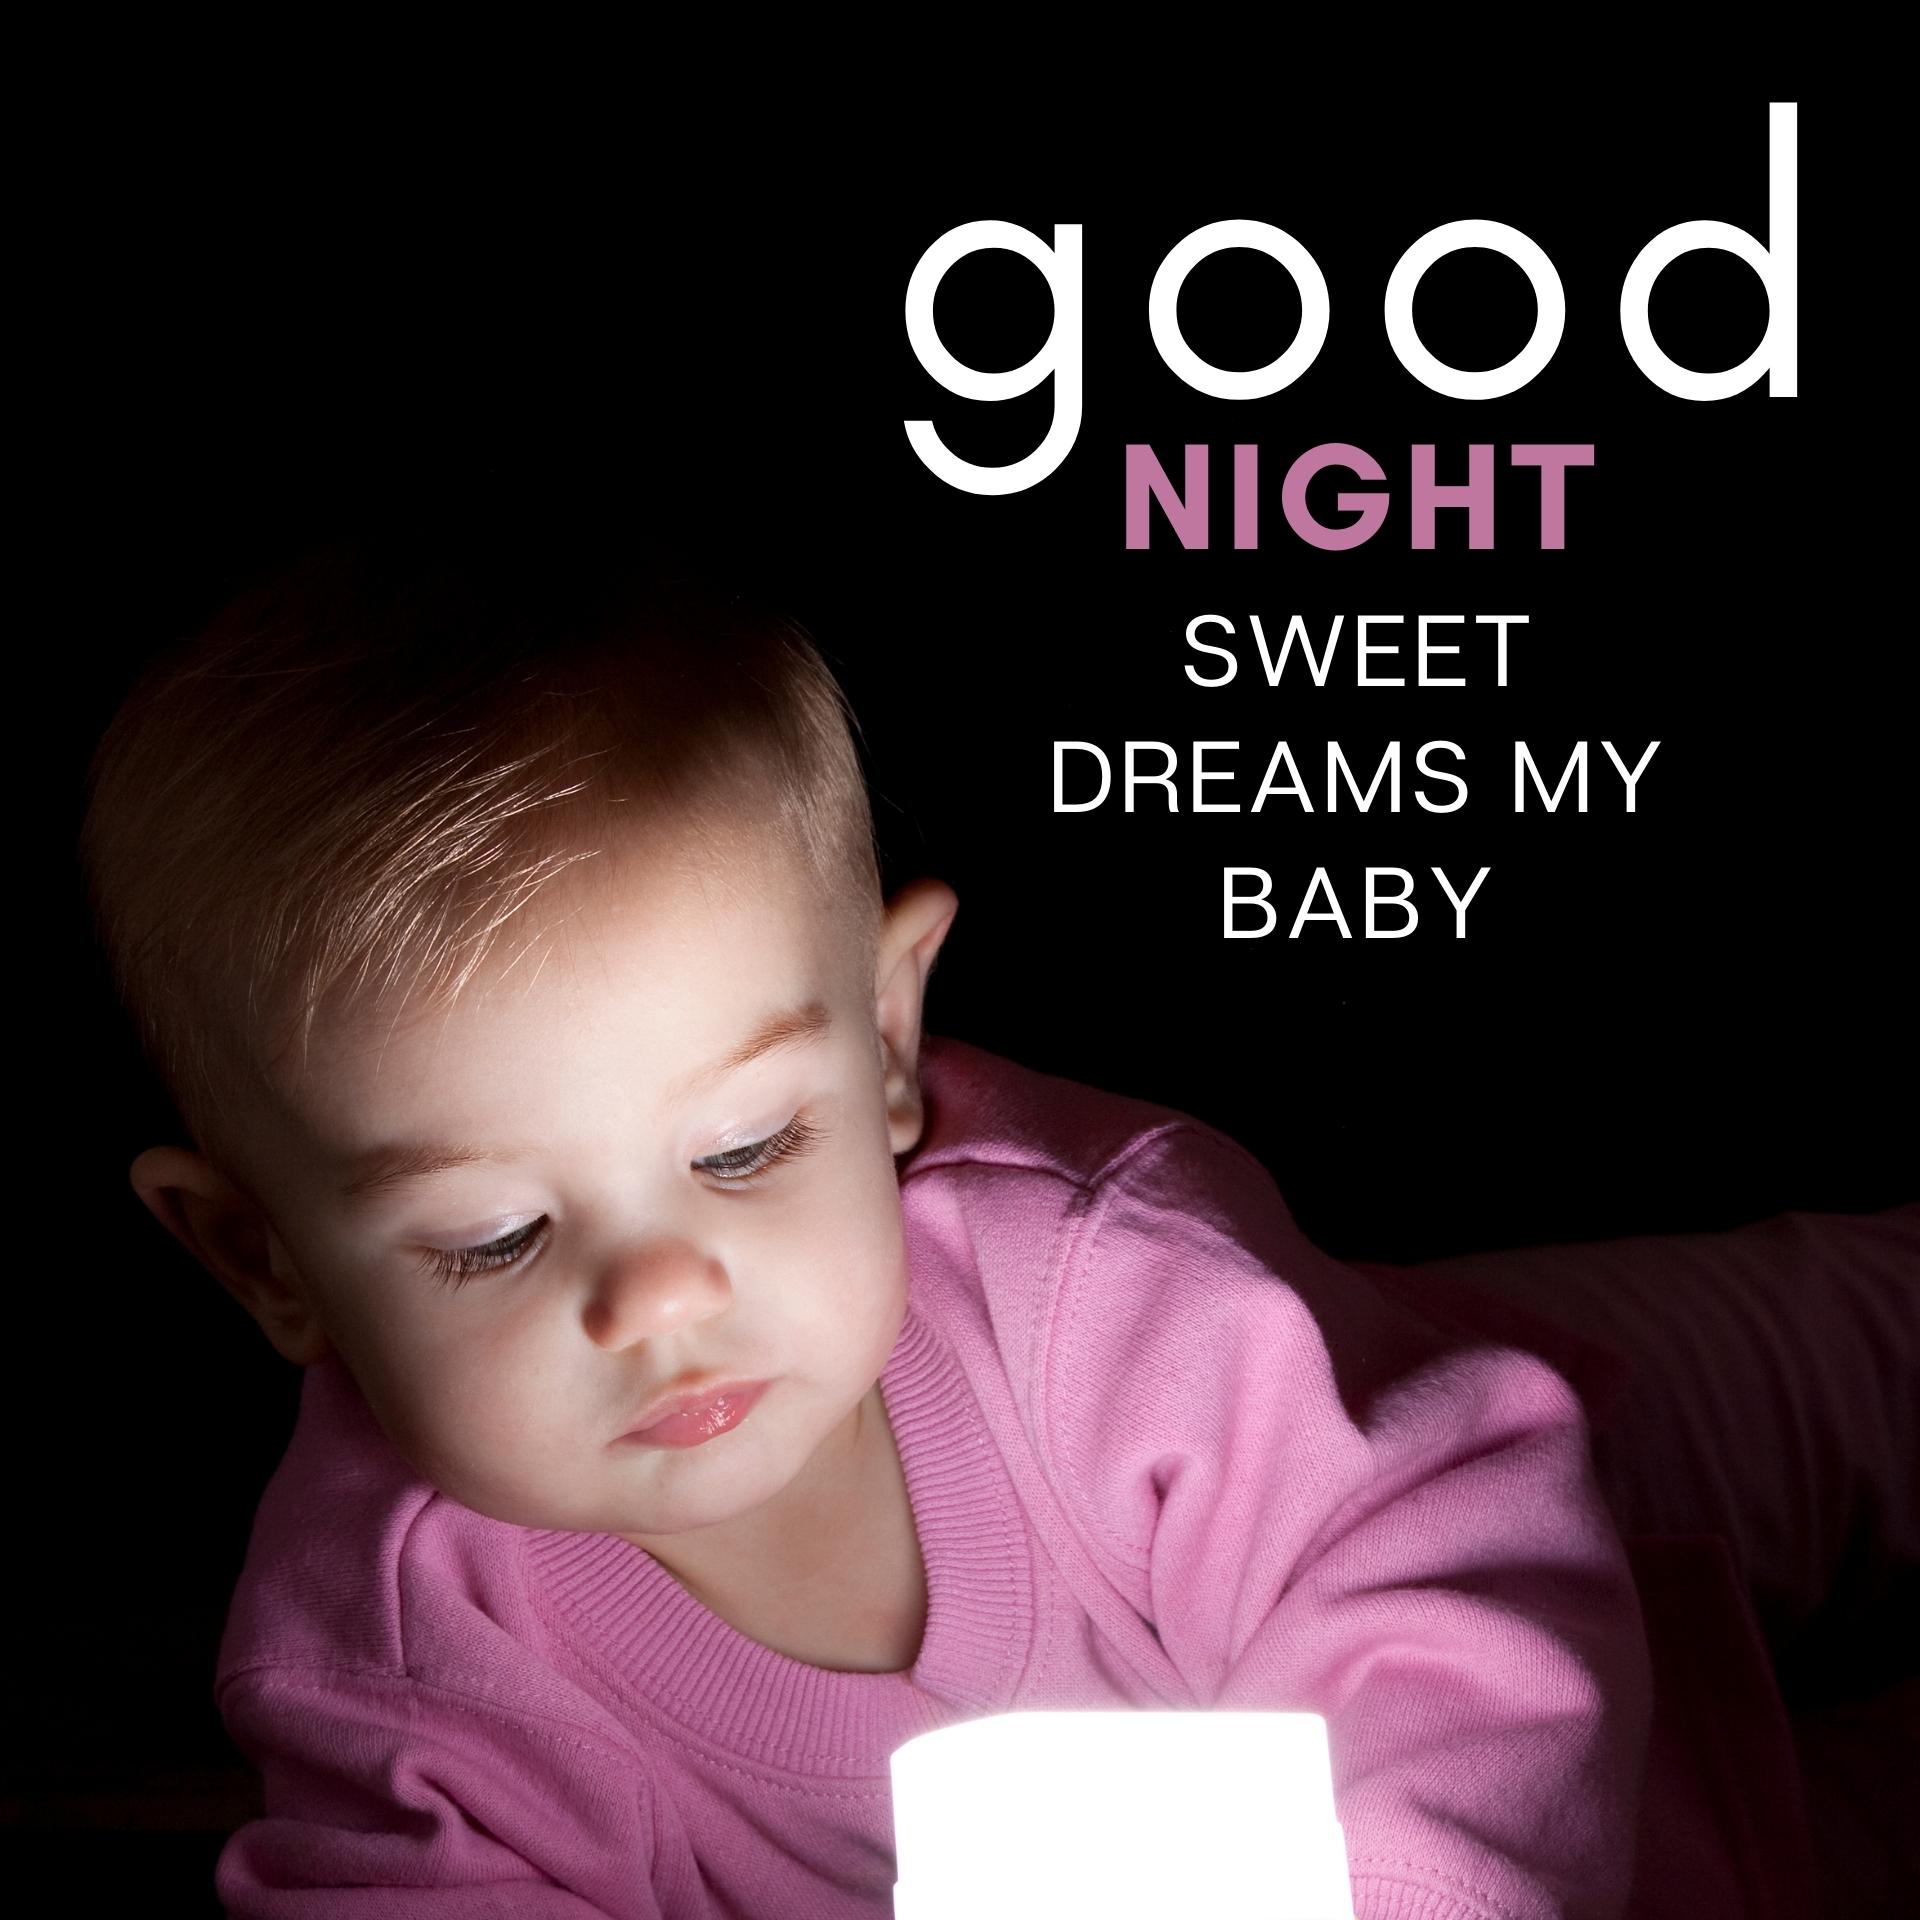 Good Night Baby Images